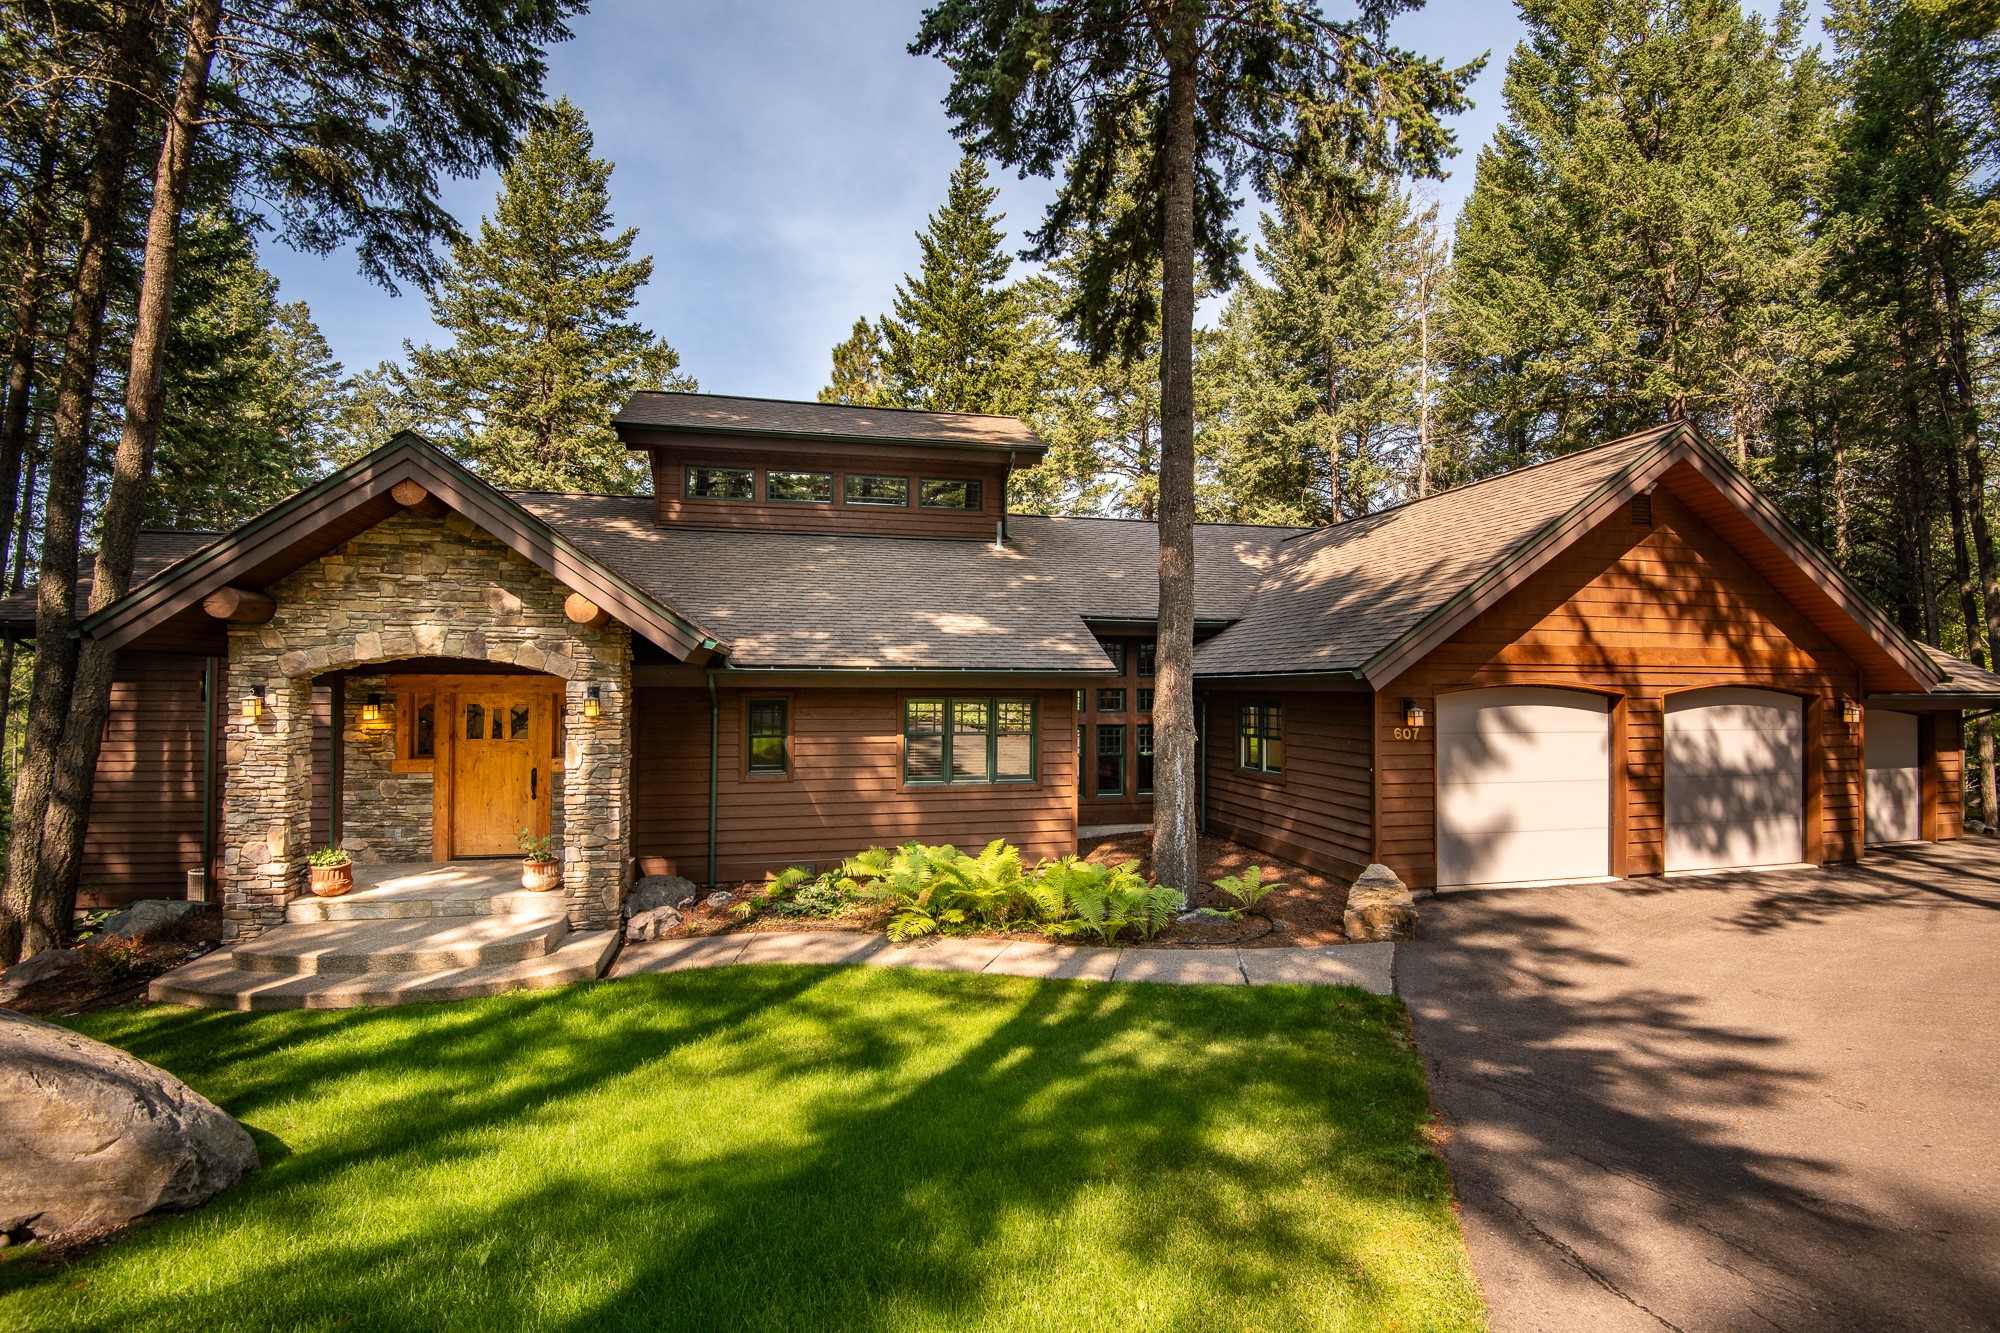 Impeccably Crafted Lodge-Style Living - Past Winner of the Parade of Homes, this 4-bedroom, 3-bathroom home built by Stoddard Construction Company offers a truly unique residence with its flawless style, incredible features and phenomenal views of Flathead Lake and Blacktail Mountain. Step inside beyond the stunning stone porch and hand-crafted front door and fall in love with the custom Greene and Greene architectural firm-inspired interior, complete with huge log beams & accents, and quarter sawn white oak flooring. Elegantly designed, the floor plan provides 4,350 sq. ft. of living space. The living room surrounds a massive stone fireplace and the large dining area opens out to the deck - perfect for drinks while taking in those gorgeous views. Back inside, the gourmet kitchen comes fitted with impeccable knotty alder distressed cabinetry, built-ins, and KitchenAid commercial-grade appliances, including a 6-burner gas range and wine cooler. The study is fully soundproofed for a home theatre, and the family room features 100+ year old fir beams and a matching mantlepiece on the gas fireplace. All the bedrooms offer an incredible sanctuary for the end of each day, with the main floor primary bedroom receiving the deluxe treatment with a private ensuite straight out of a 5-star resort. Fitted out for convenient contemporary living, the home also features a "Super Smart Computer System" accessible via phone and a central vacuum system. The attached 3-car garage is wired for a woodworking shop. Two central forced-air heating systems keep the interior comfortable, and a combination of Weather Shield Dual Glaze, low E insulated, clad windows manufactured in Alder wood, R-38 insulated ceilings and R-23 bib insulation in all the walls for energy efficiency. Call Jeanie Deetz at (406) 270-1942, or your real estate professional.